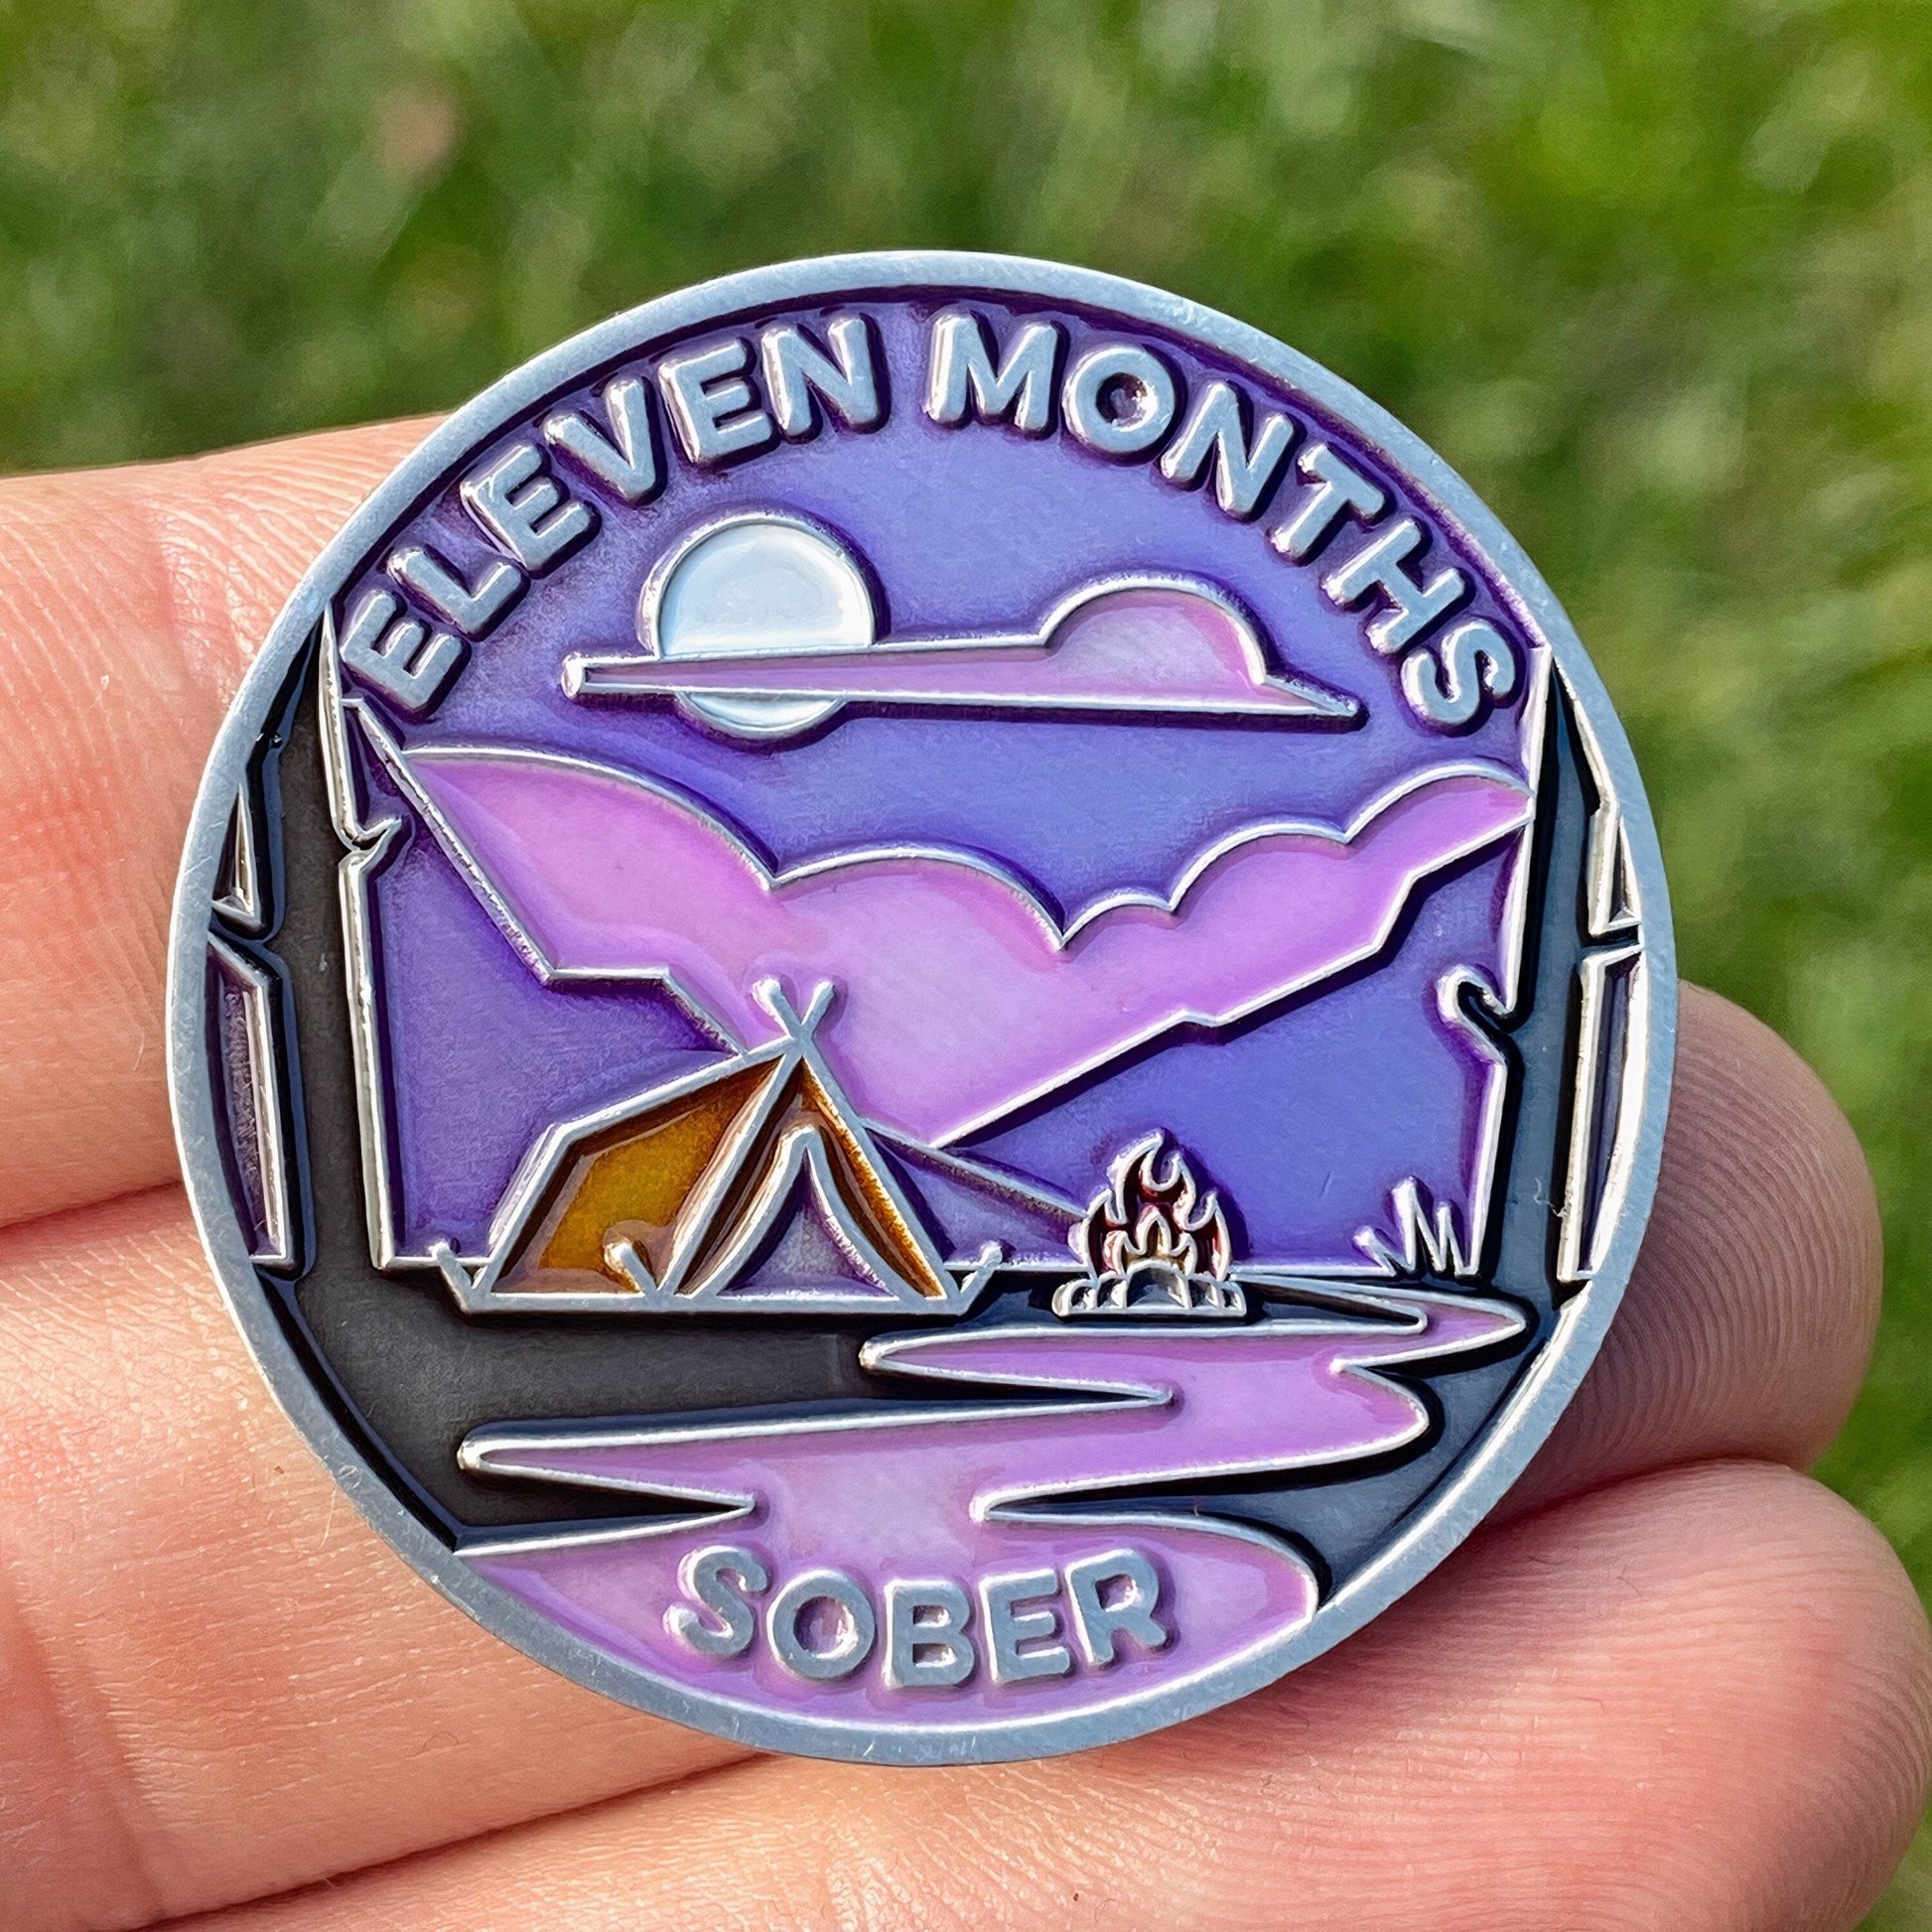 Eleven Months Sober sobriety coin - The Achieve Mint